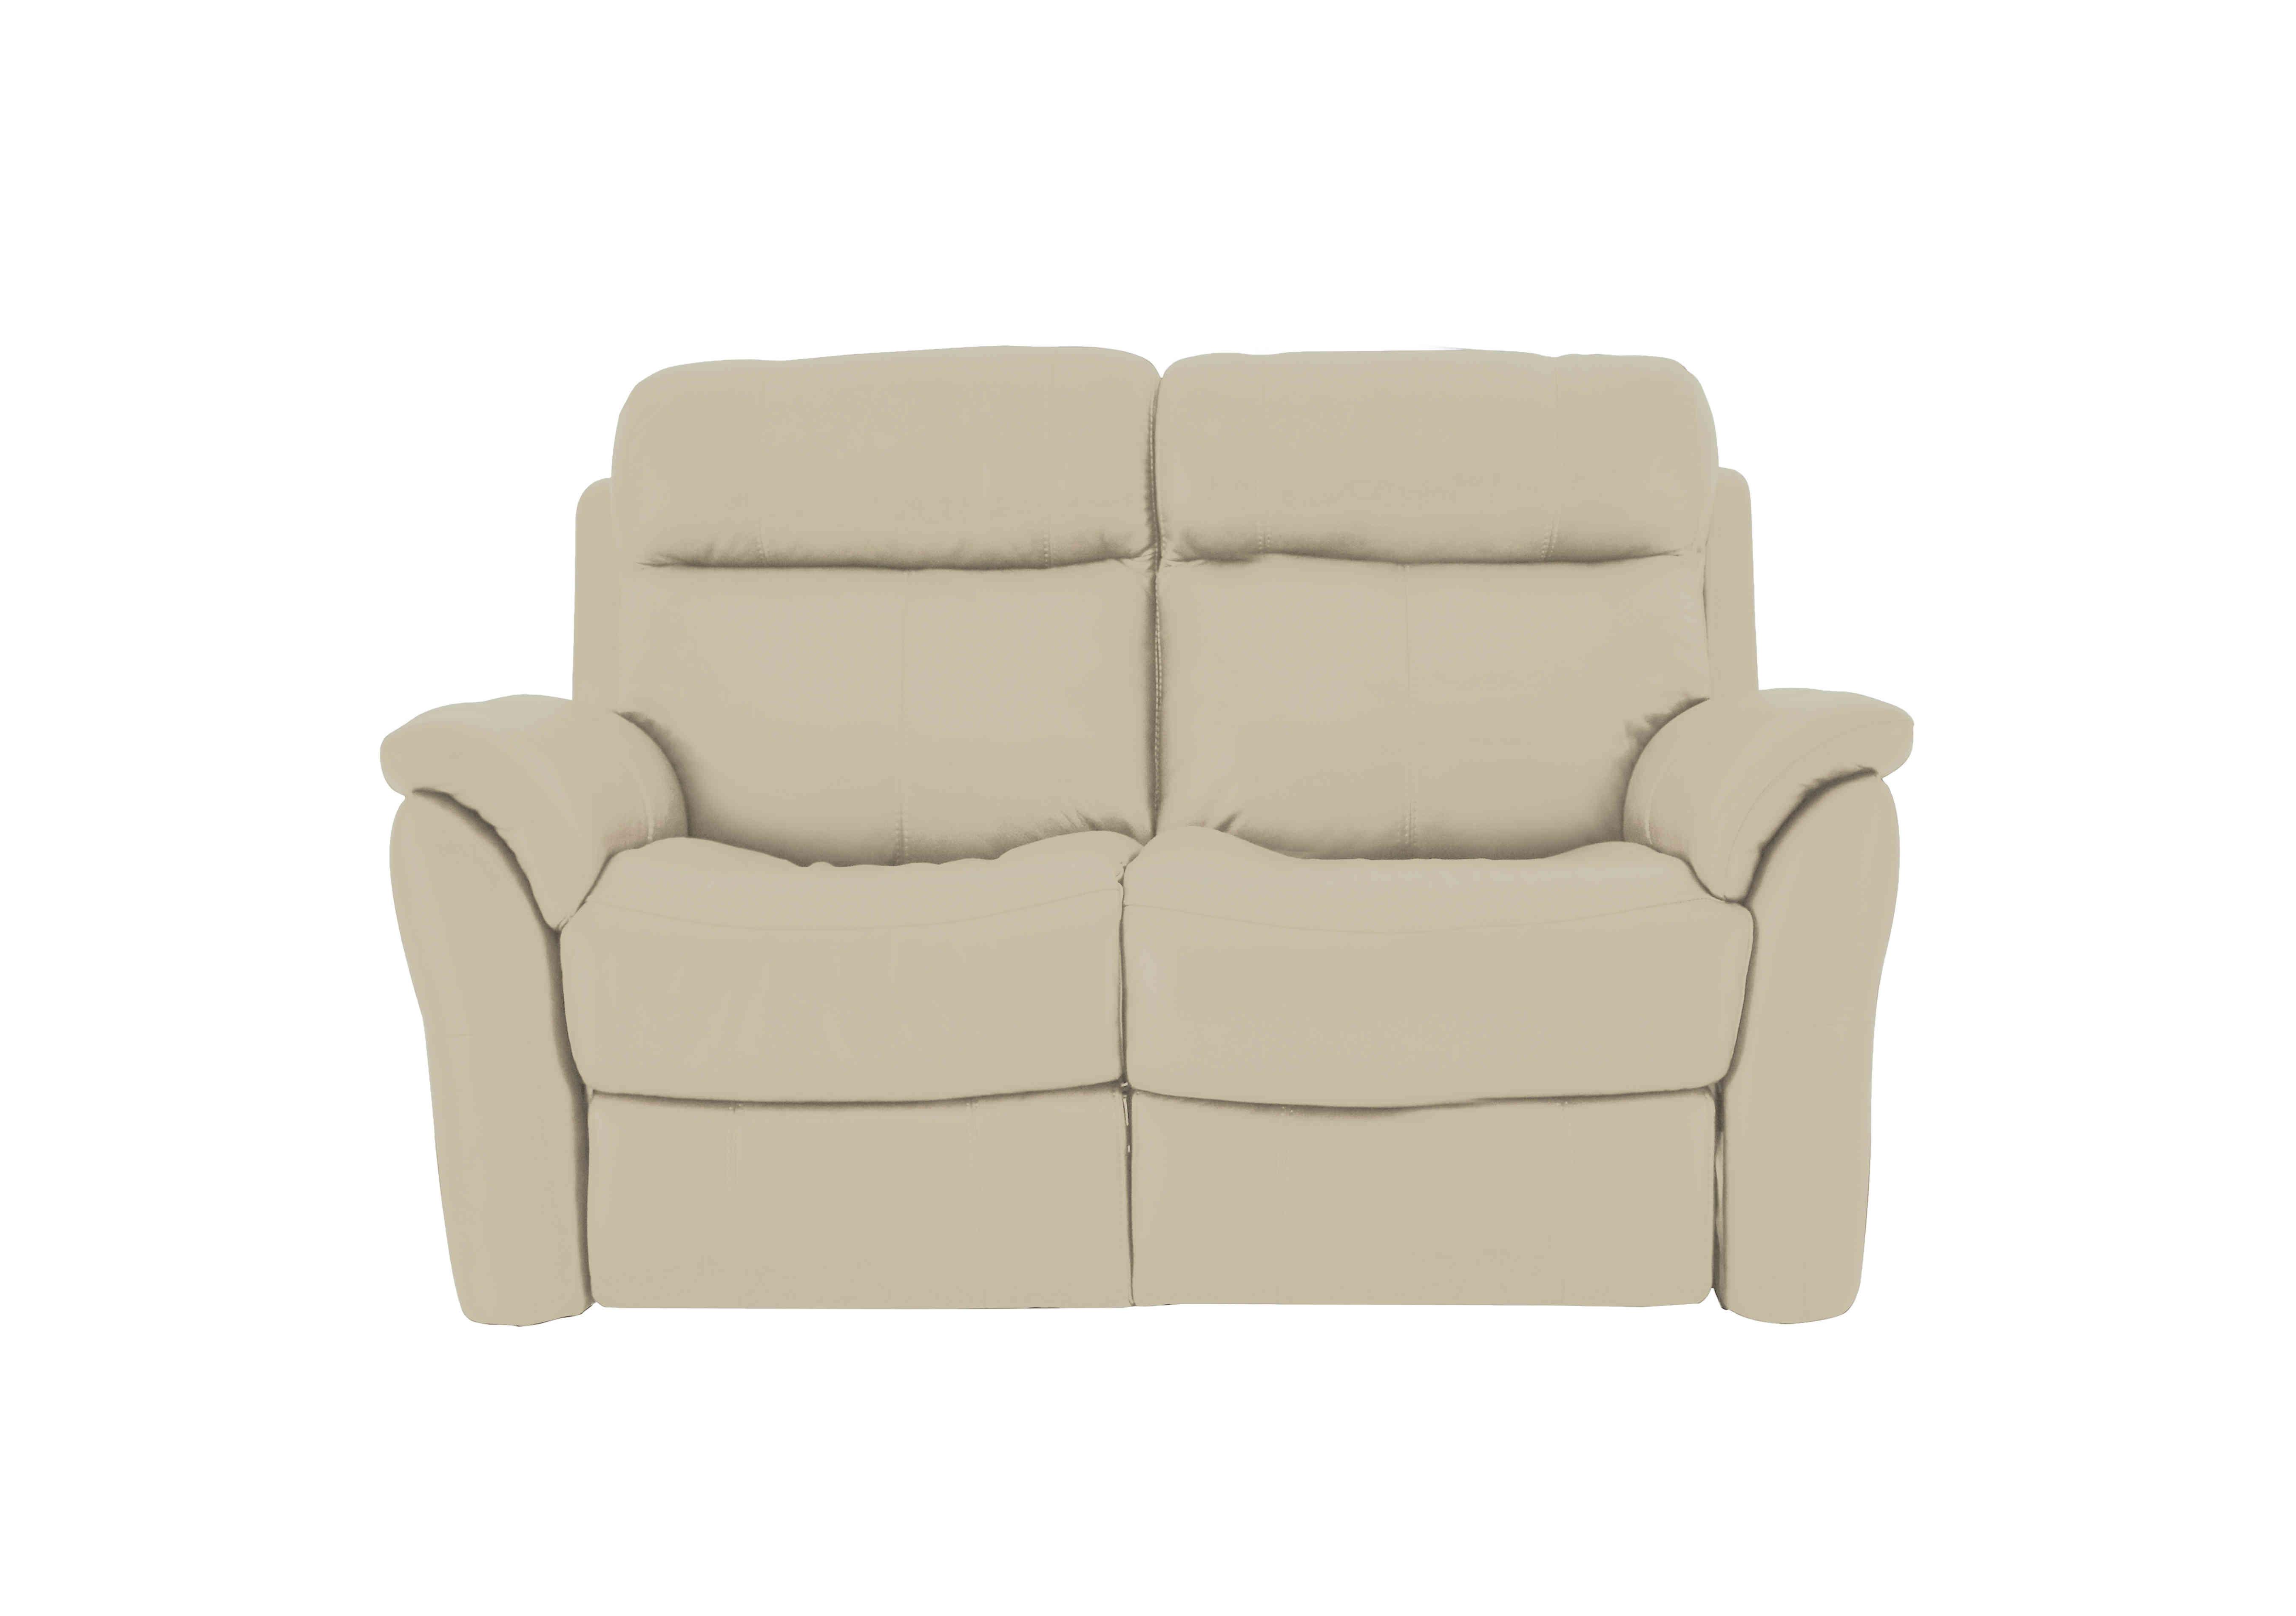 Relax Station Revive 2 Seater Leather Sofa in Bv-862c Bisque on Furniture Village